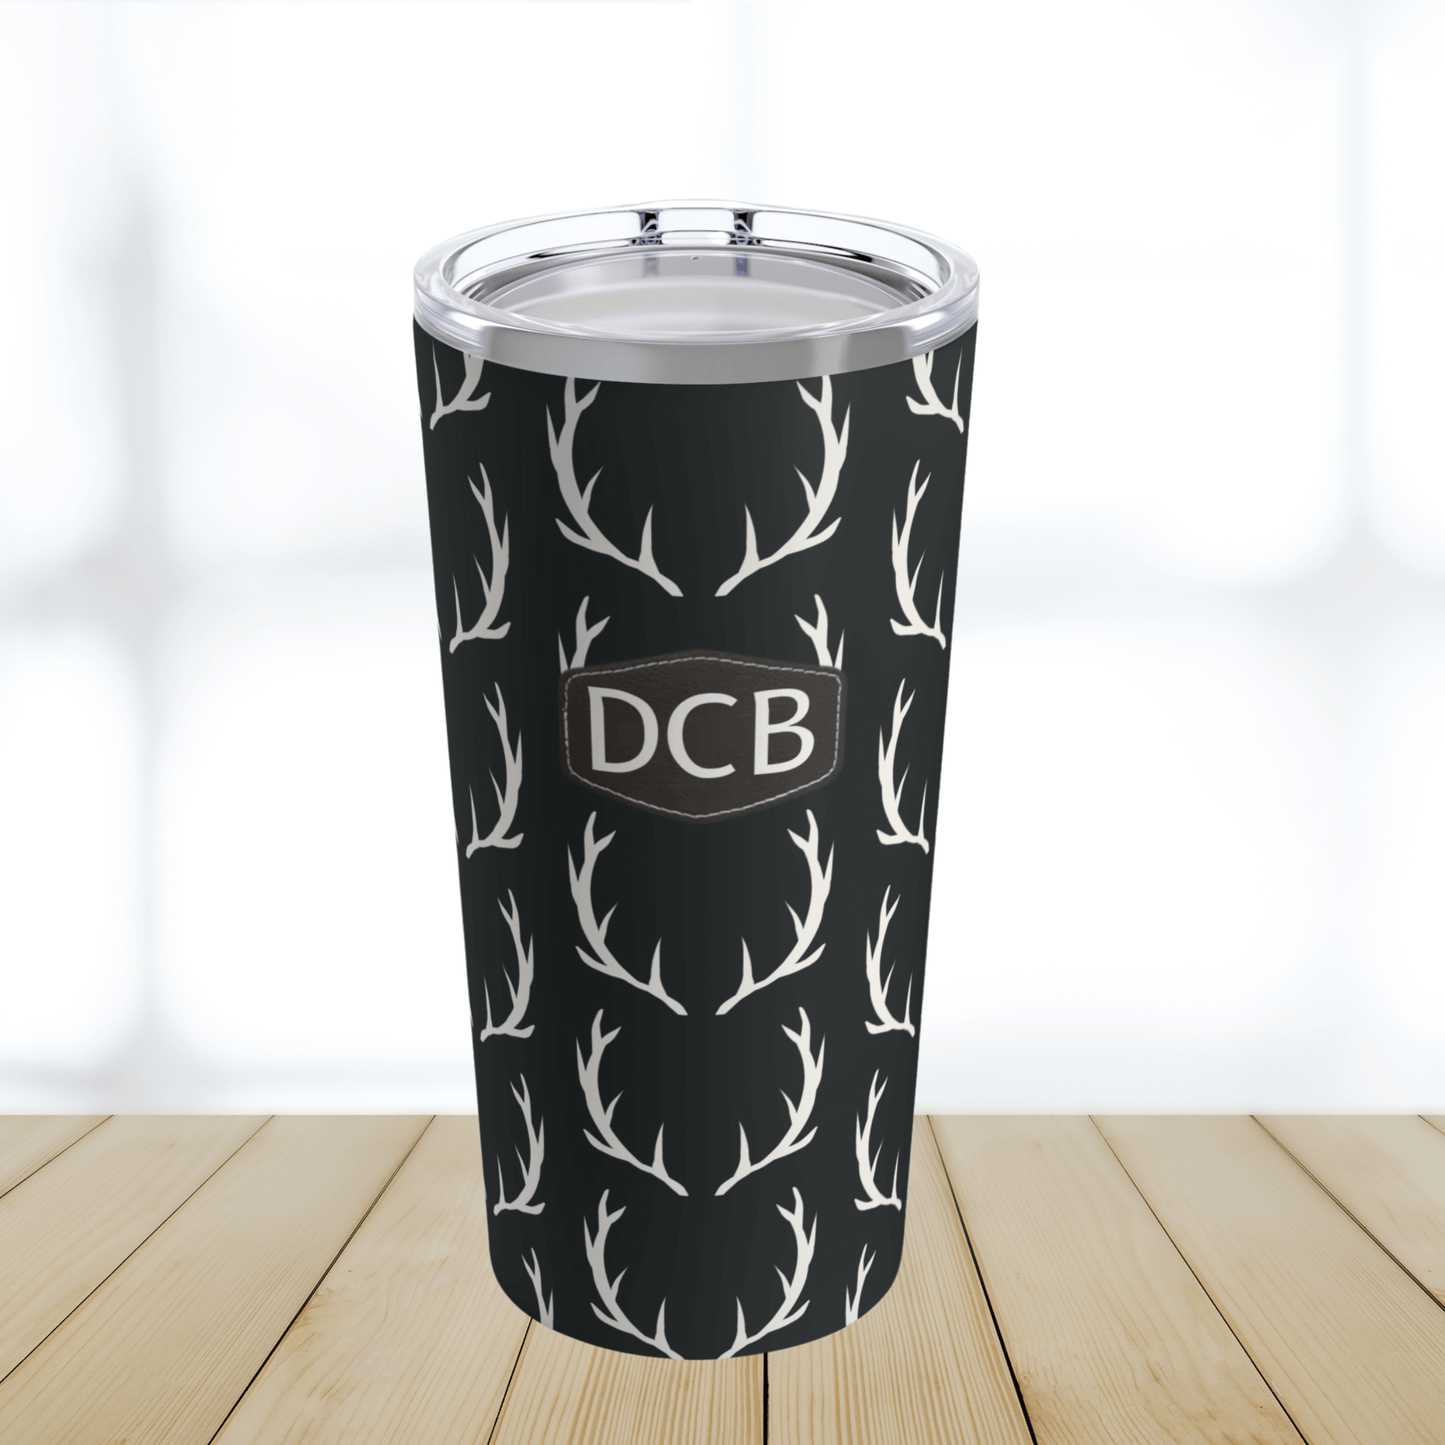 Our monogrammed deer antler tumbler cup for men is a twenty ounce black tumbler with off white deer antlers all over the cup and a brown leather print patch with three monogrammed initials on the front. This cup makes a perfect gift for men & hunters